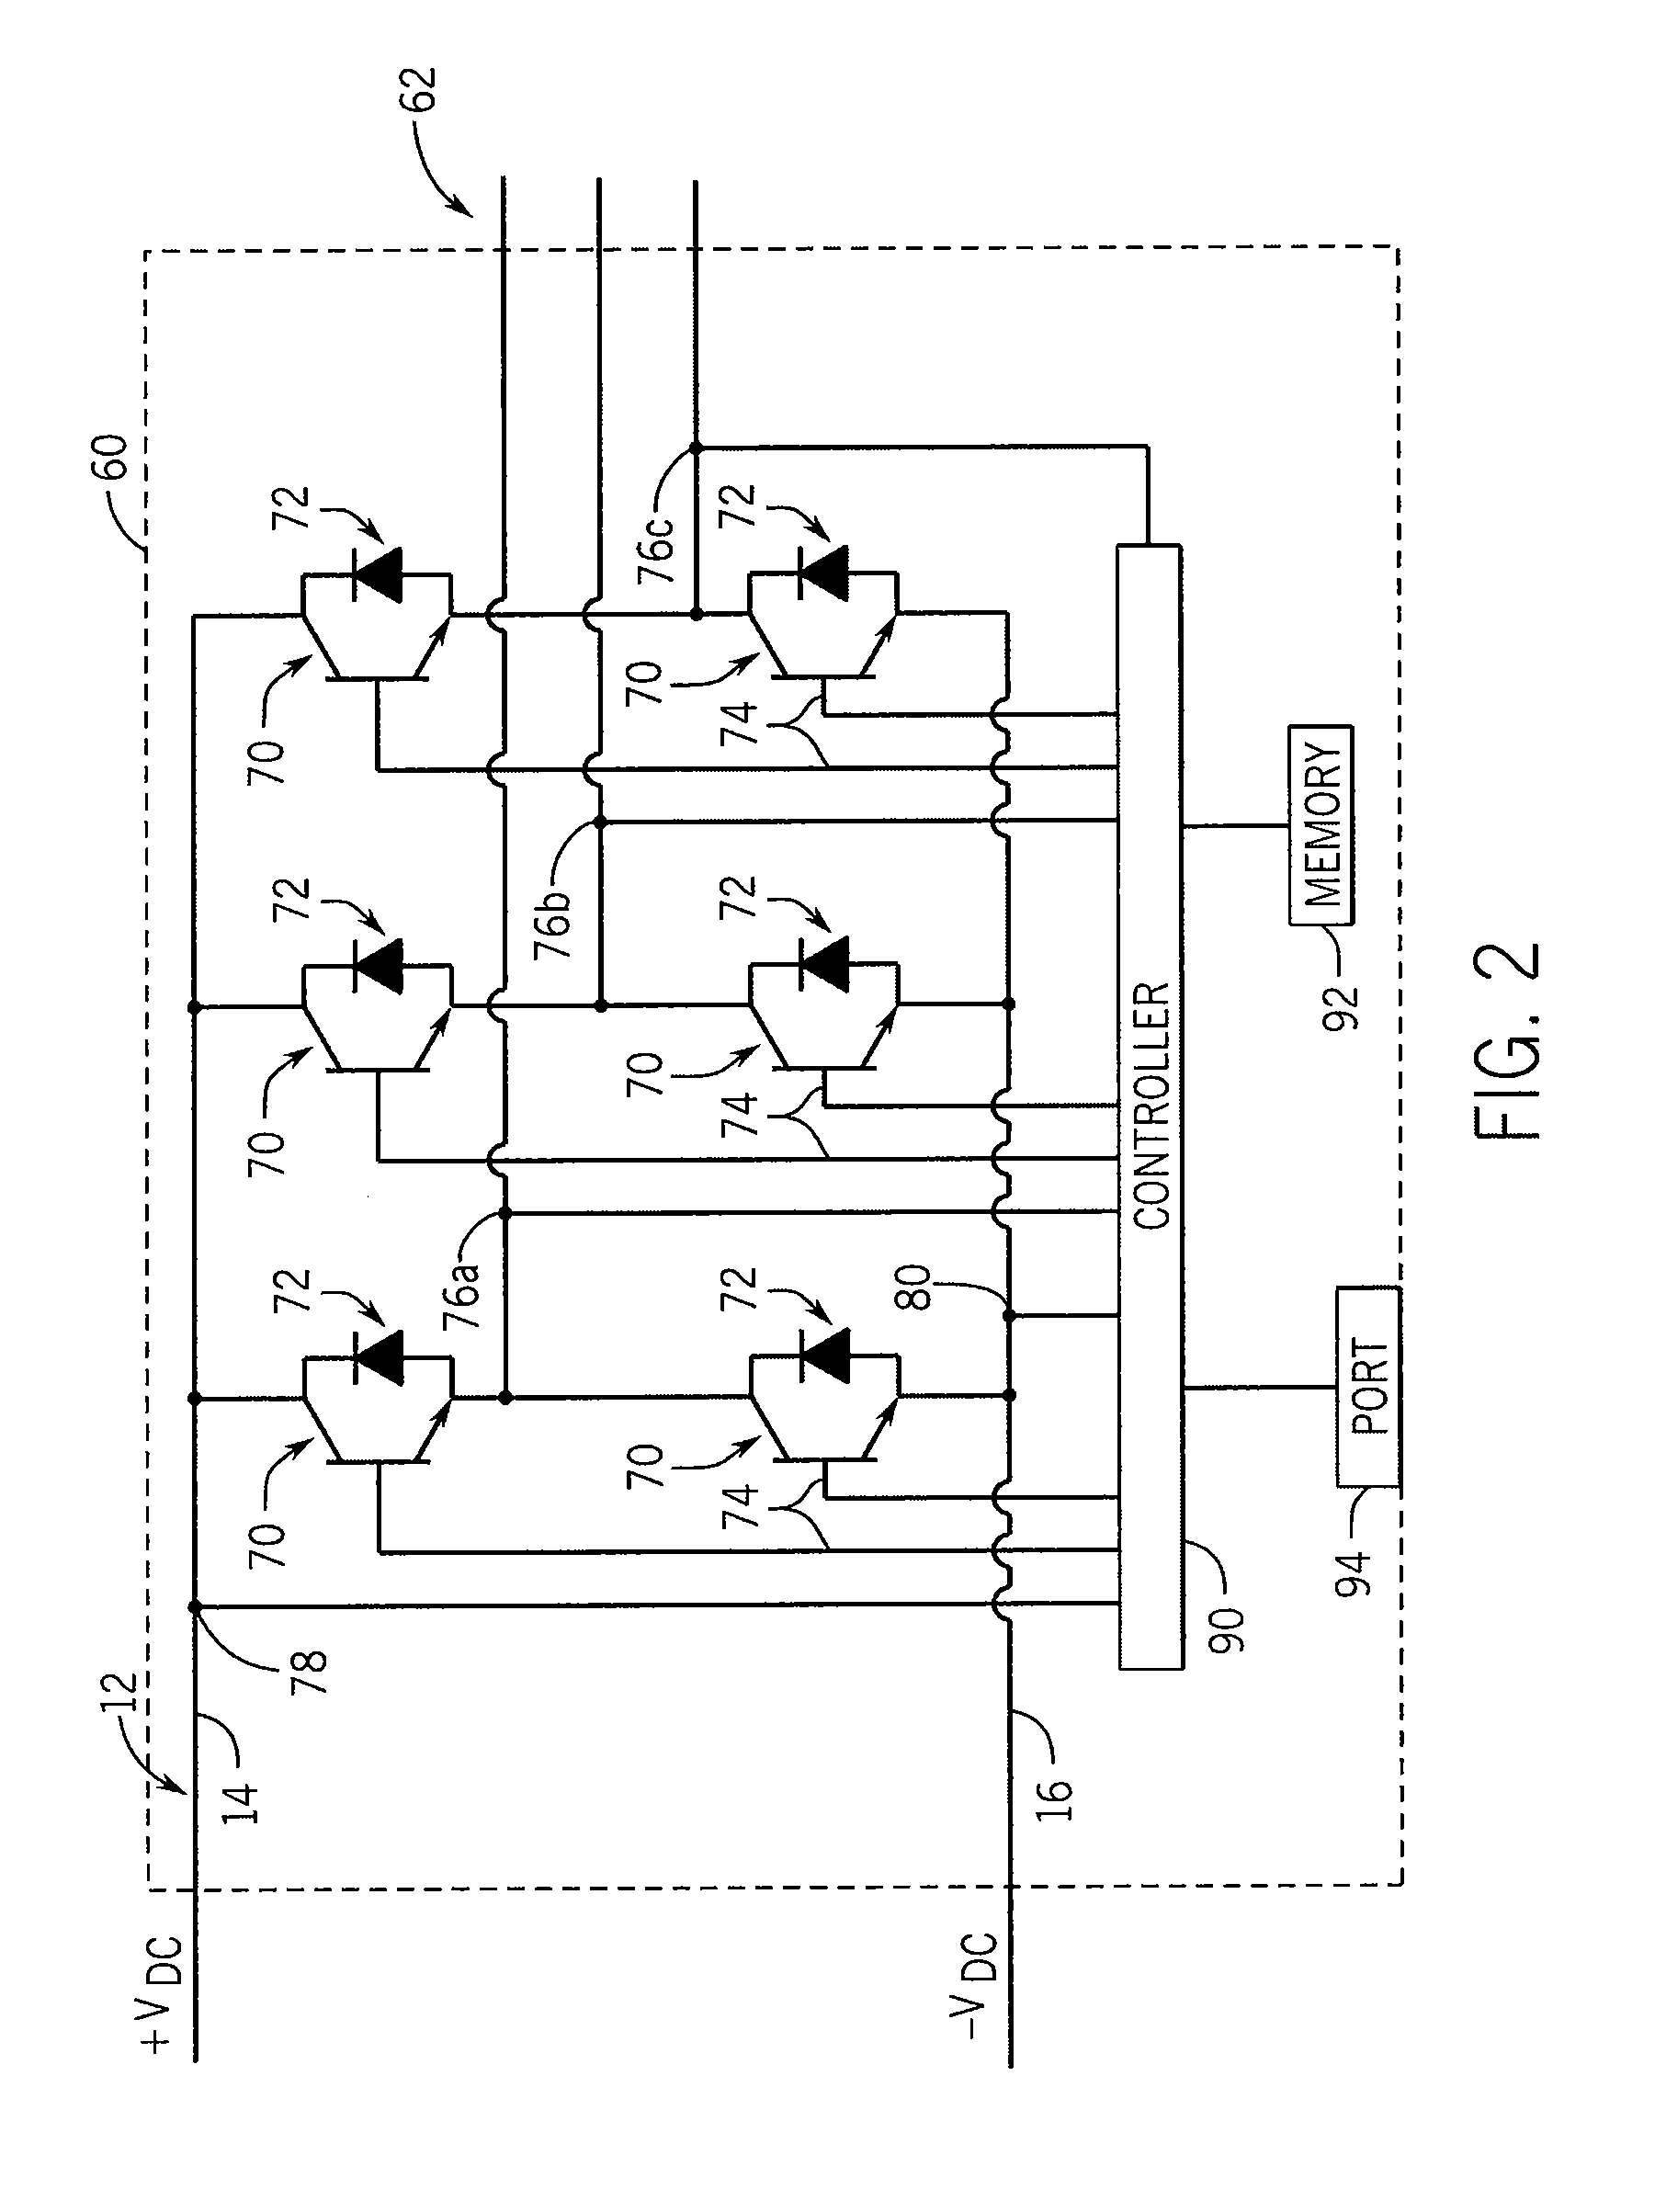 System and method for low speed control of polyphase ac machine